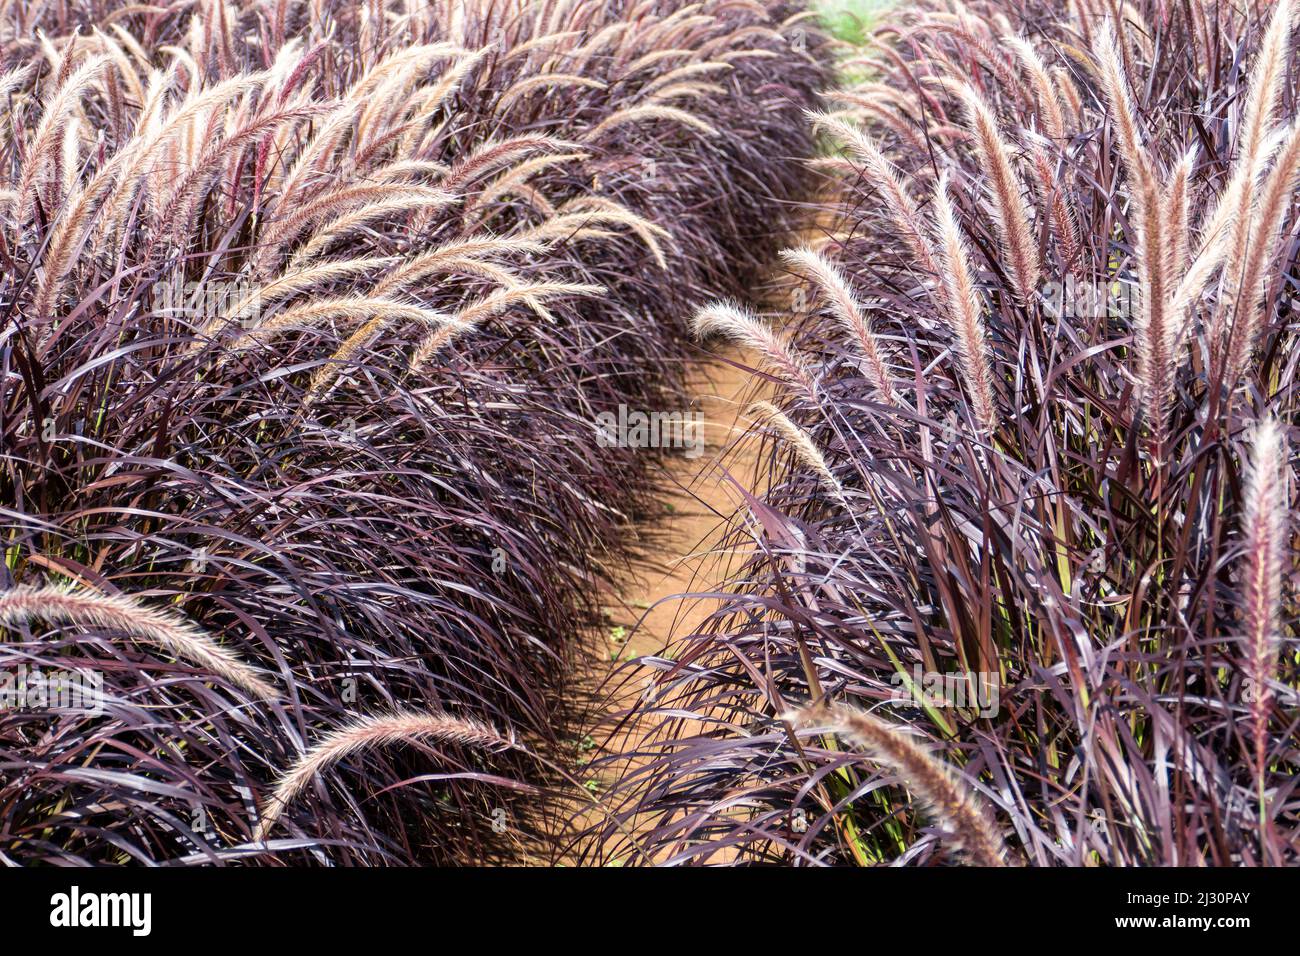 Purple fountain grass (pennisetum setaceum rubrum), a popular drought tolerant grass that forms a tidy, dense clump of purplish maroon blades topped w Stock Photo